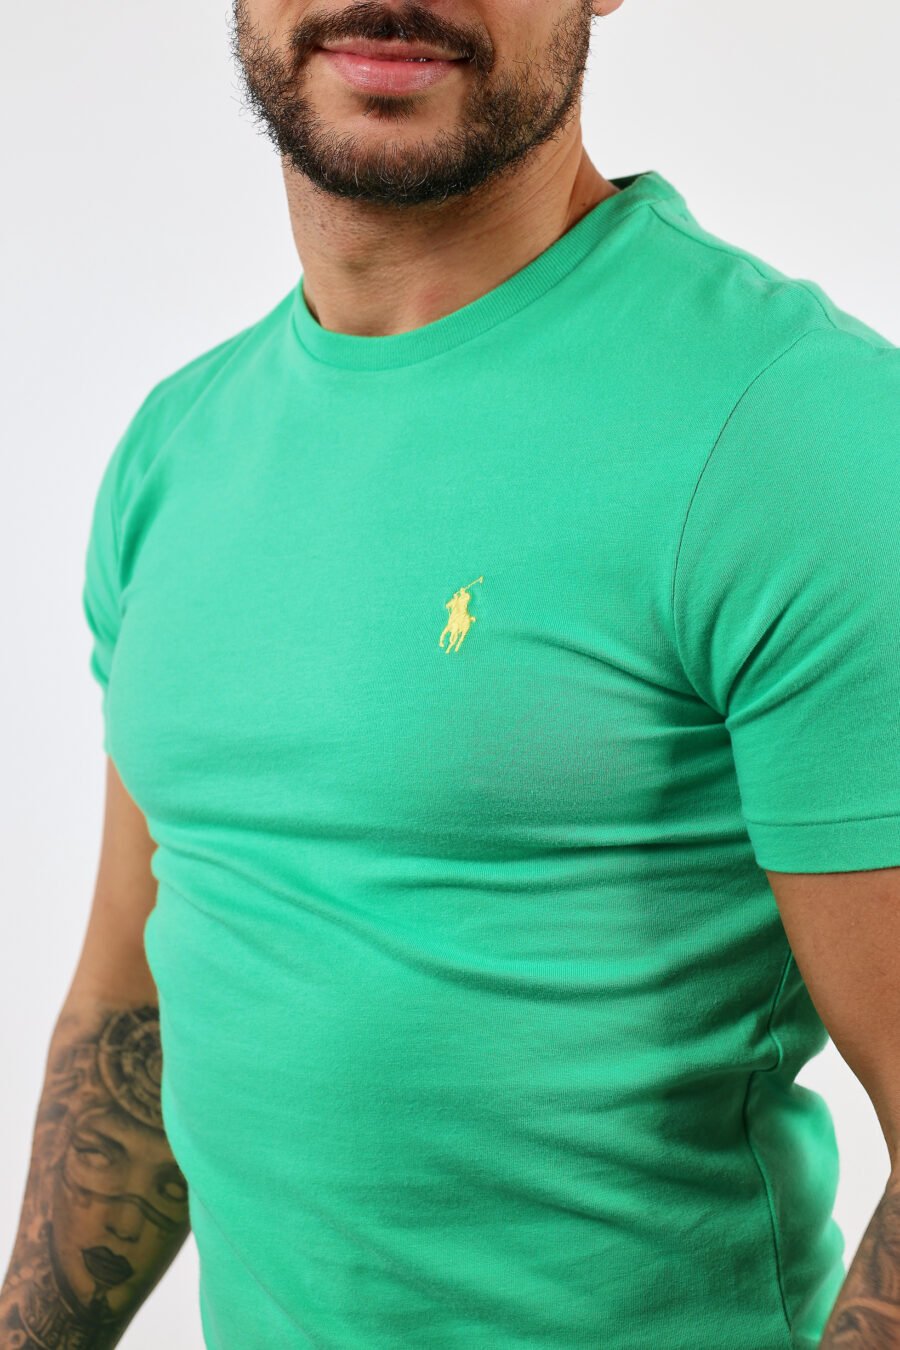 Green and yellow T-shirt with mini-logo "polo" - BLS Fashion 303